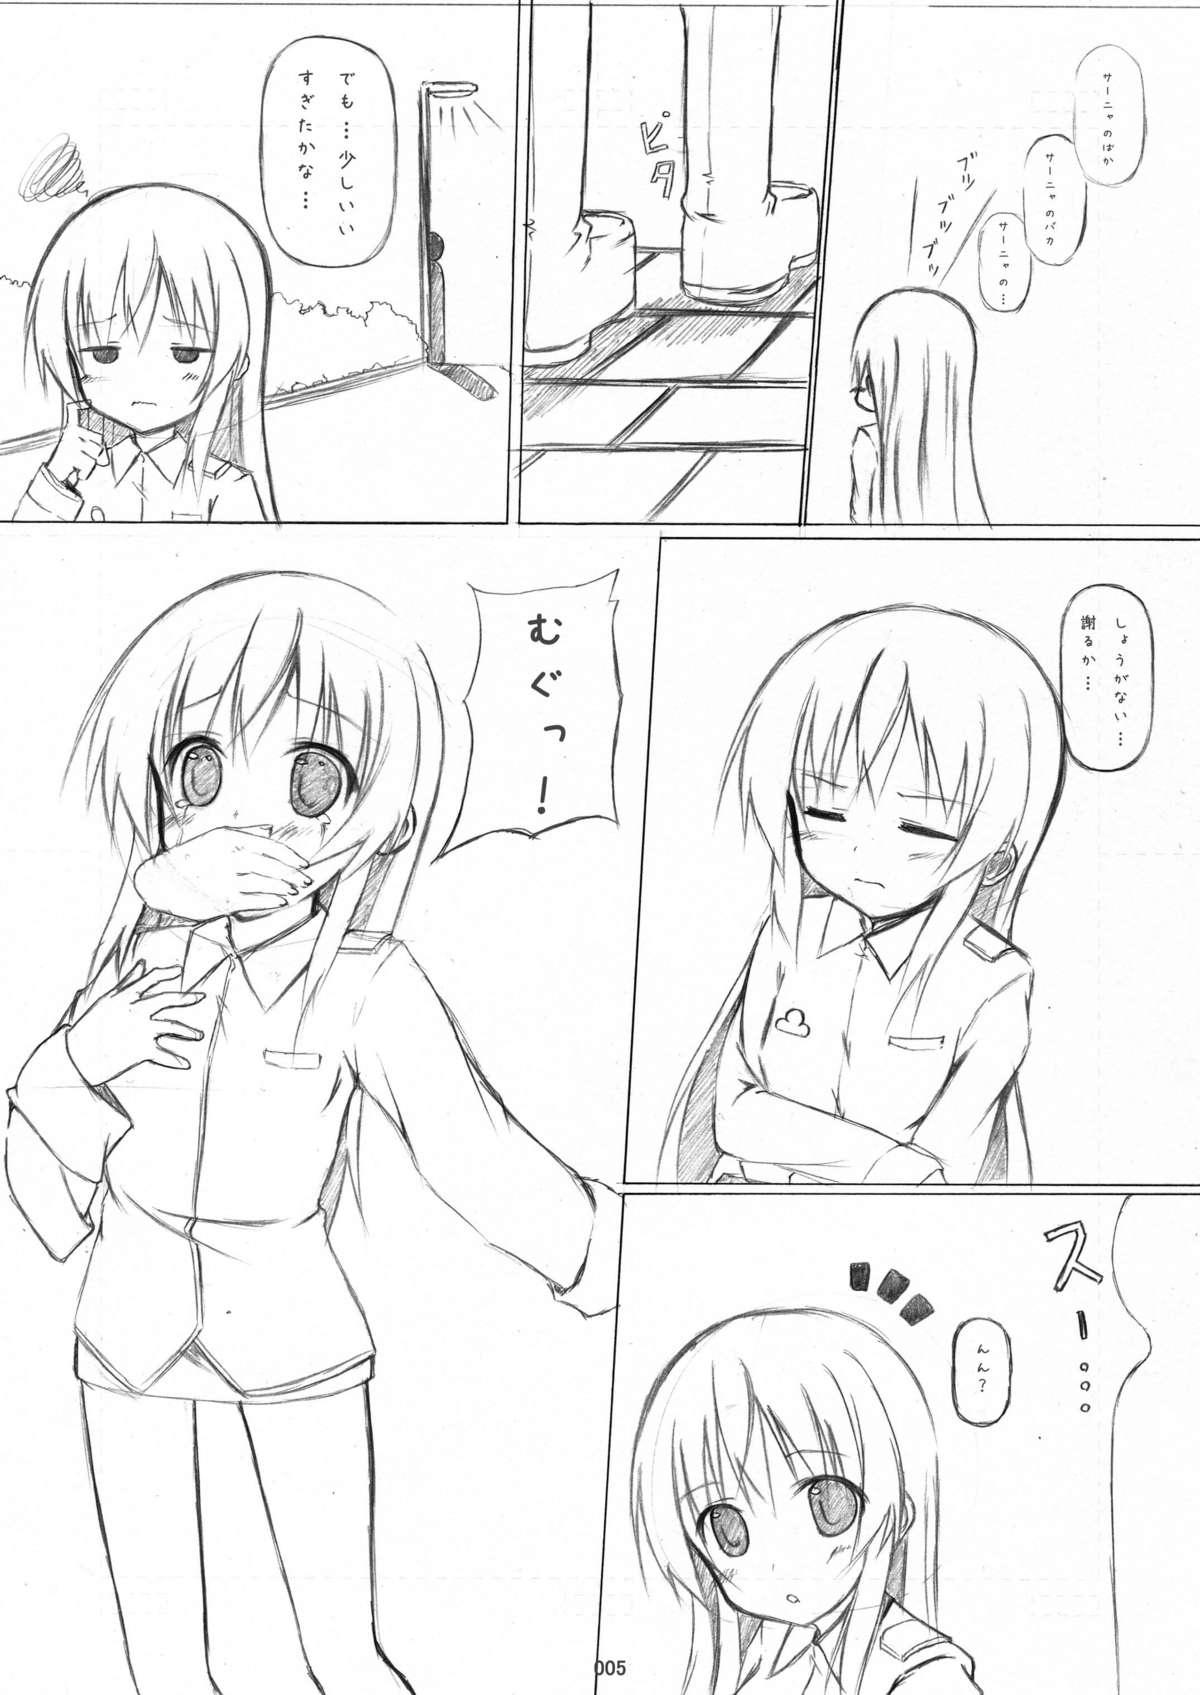 Abuse STRIKE☆ZONE 2 - Strike witches Dirty - Page 4